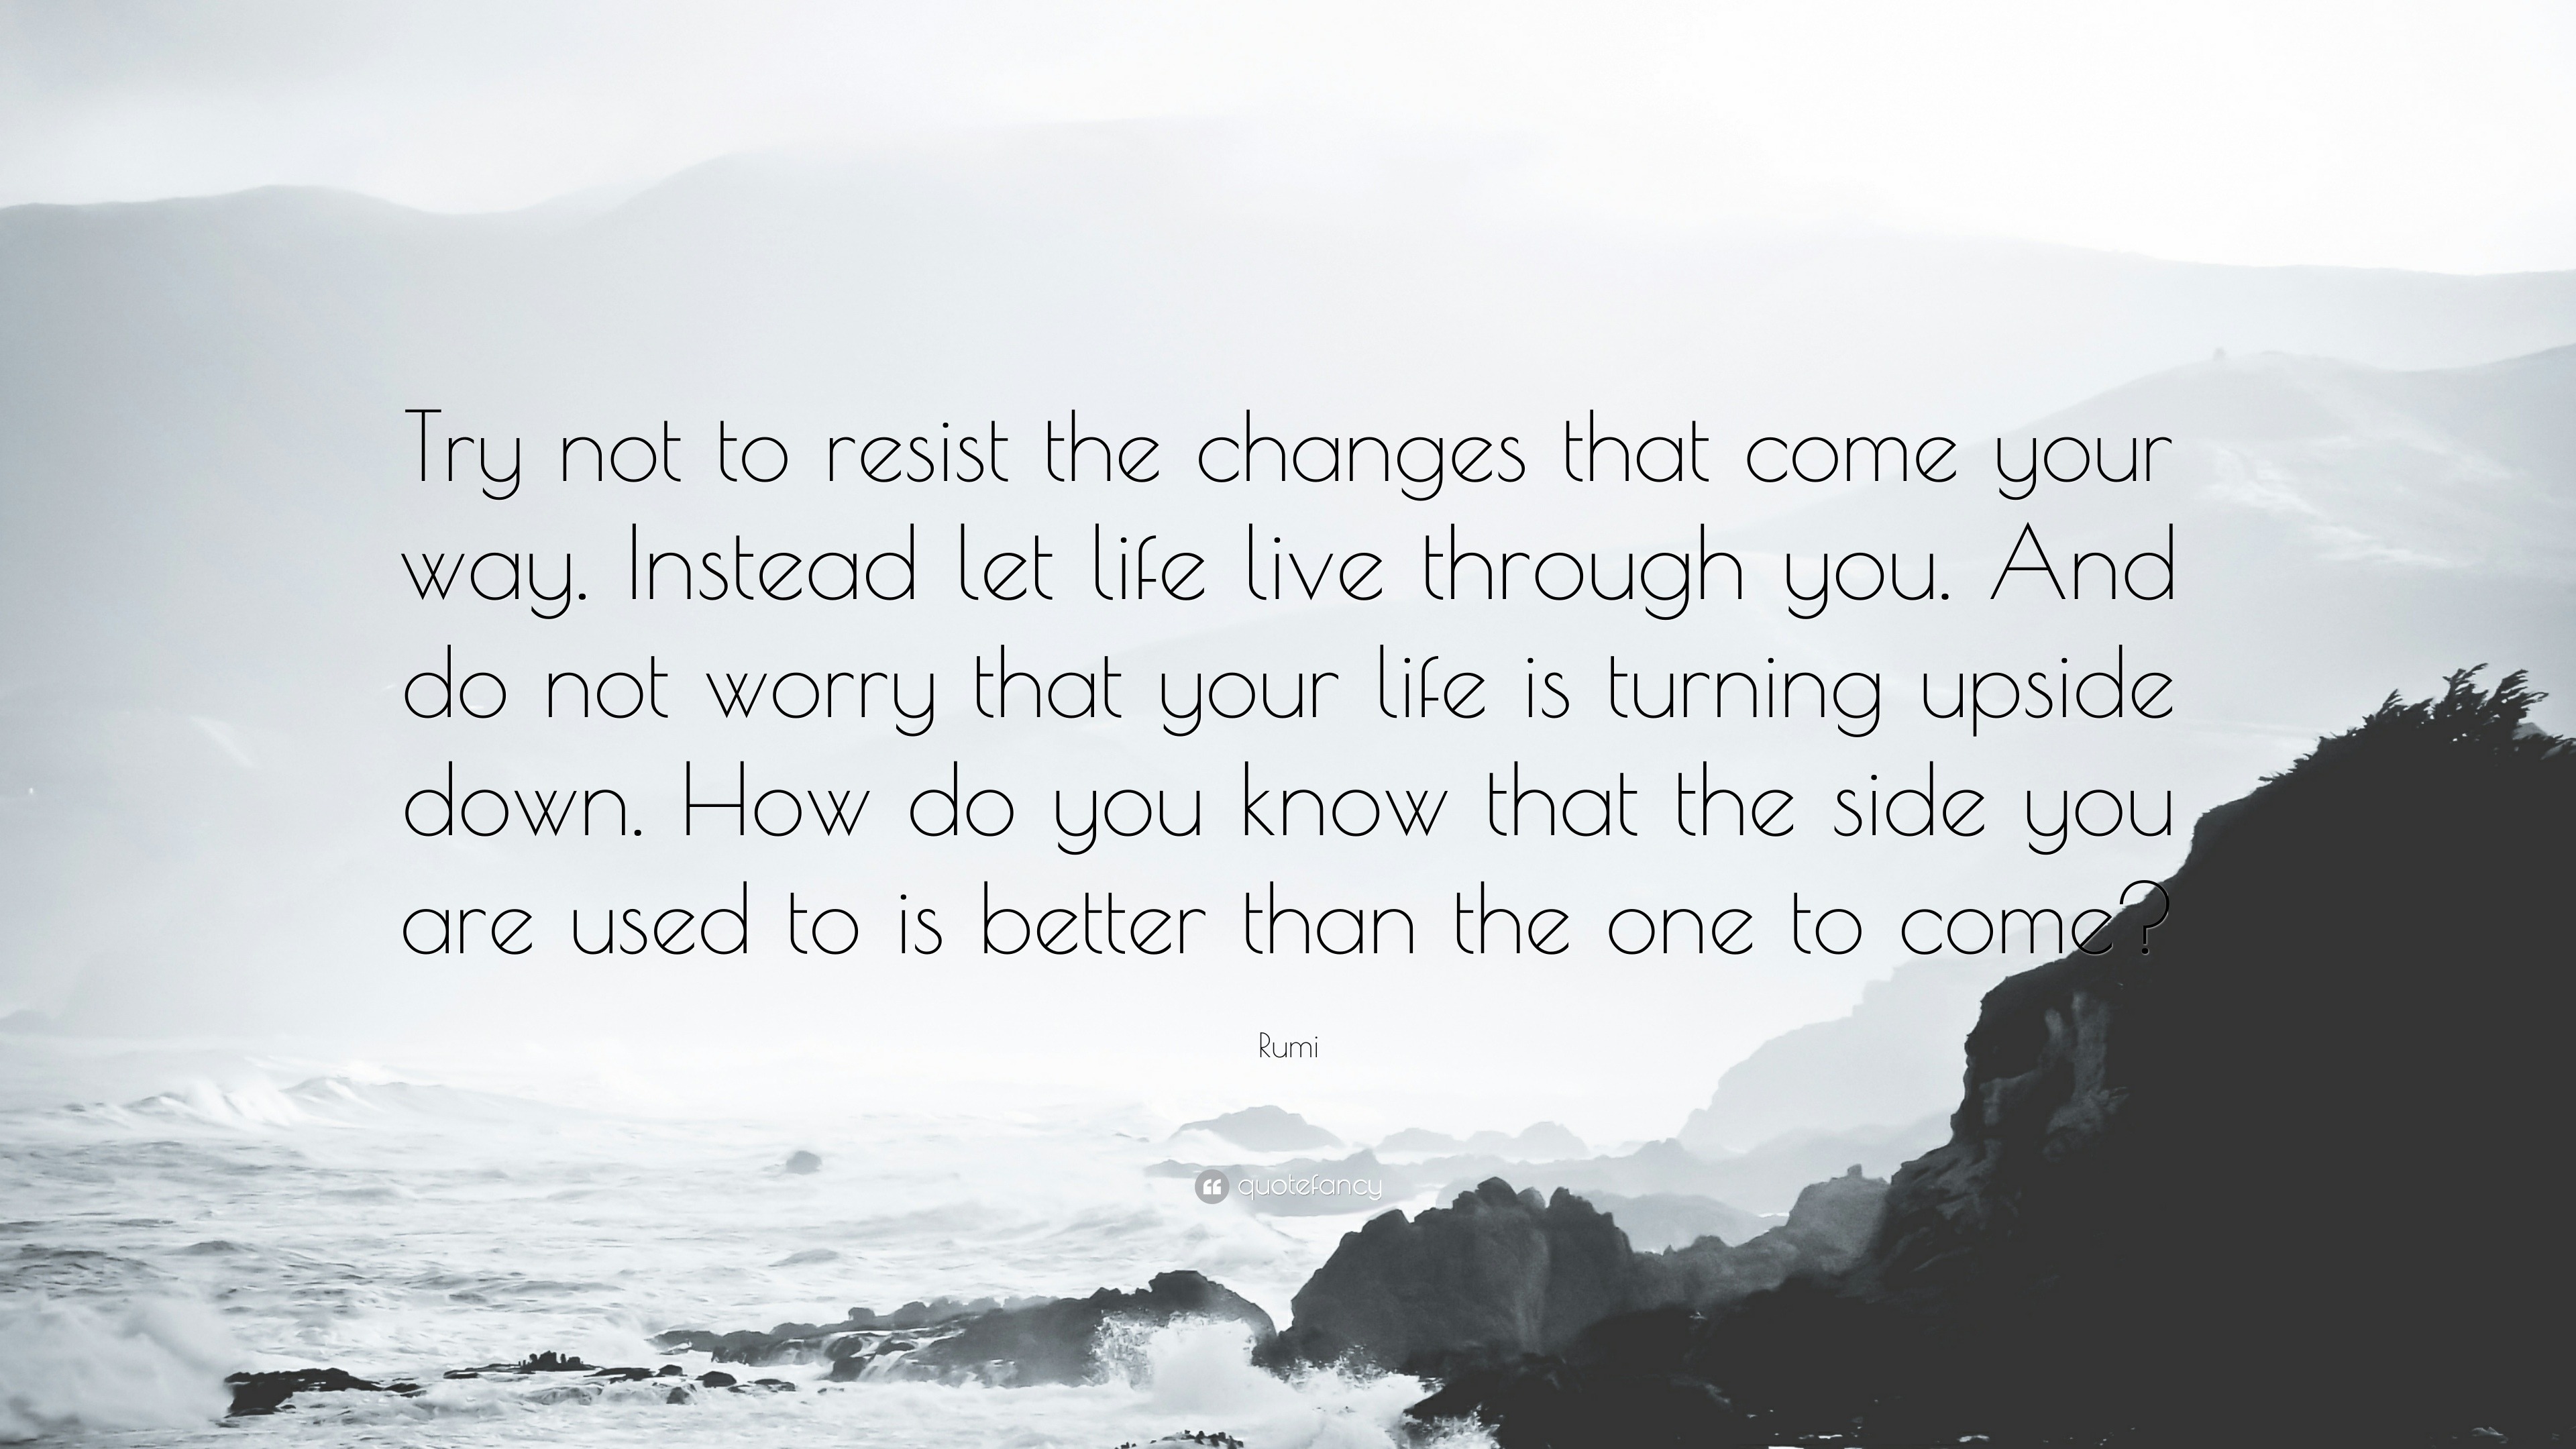 Rumi Quote: “Try not to resist the changes that come your way. Instead